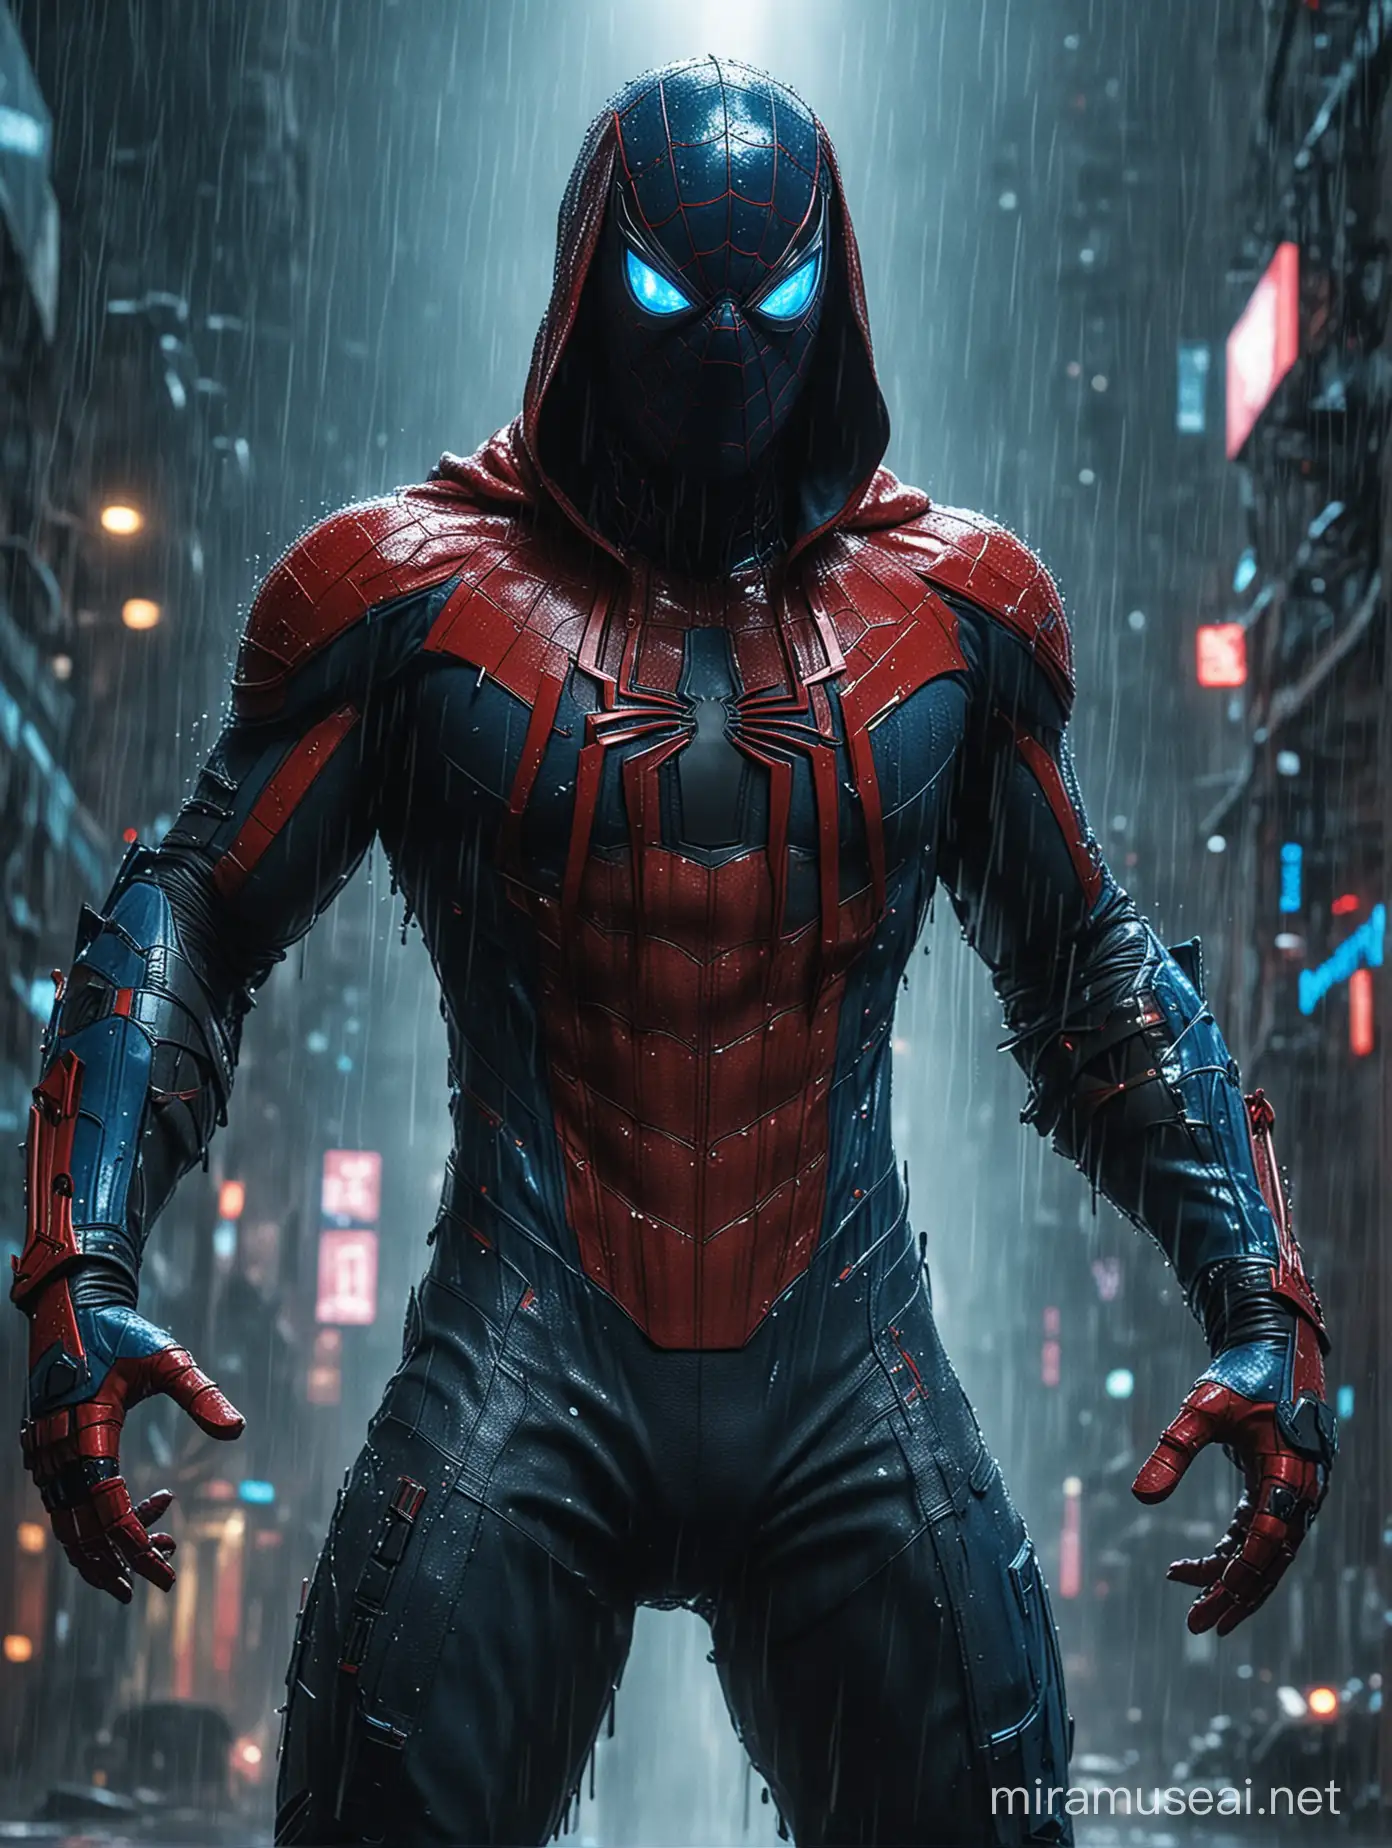 Enzo Vogrincic in  spiderman custome no face mask standing in a cyber punk blue and red themed rainy night, bulk and big body, holding his arms back and looking down at the camera with a tilted head